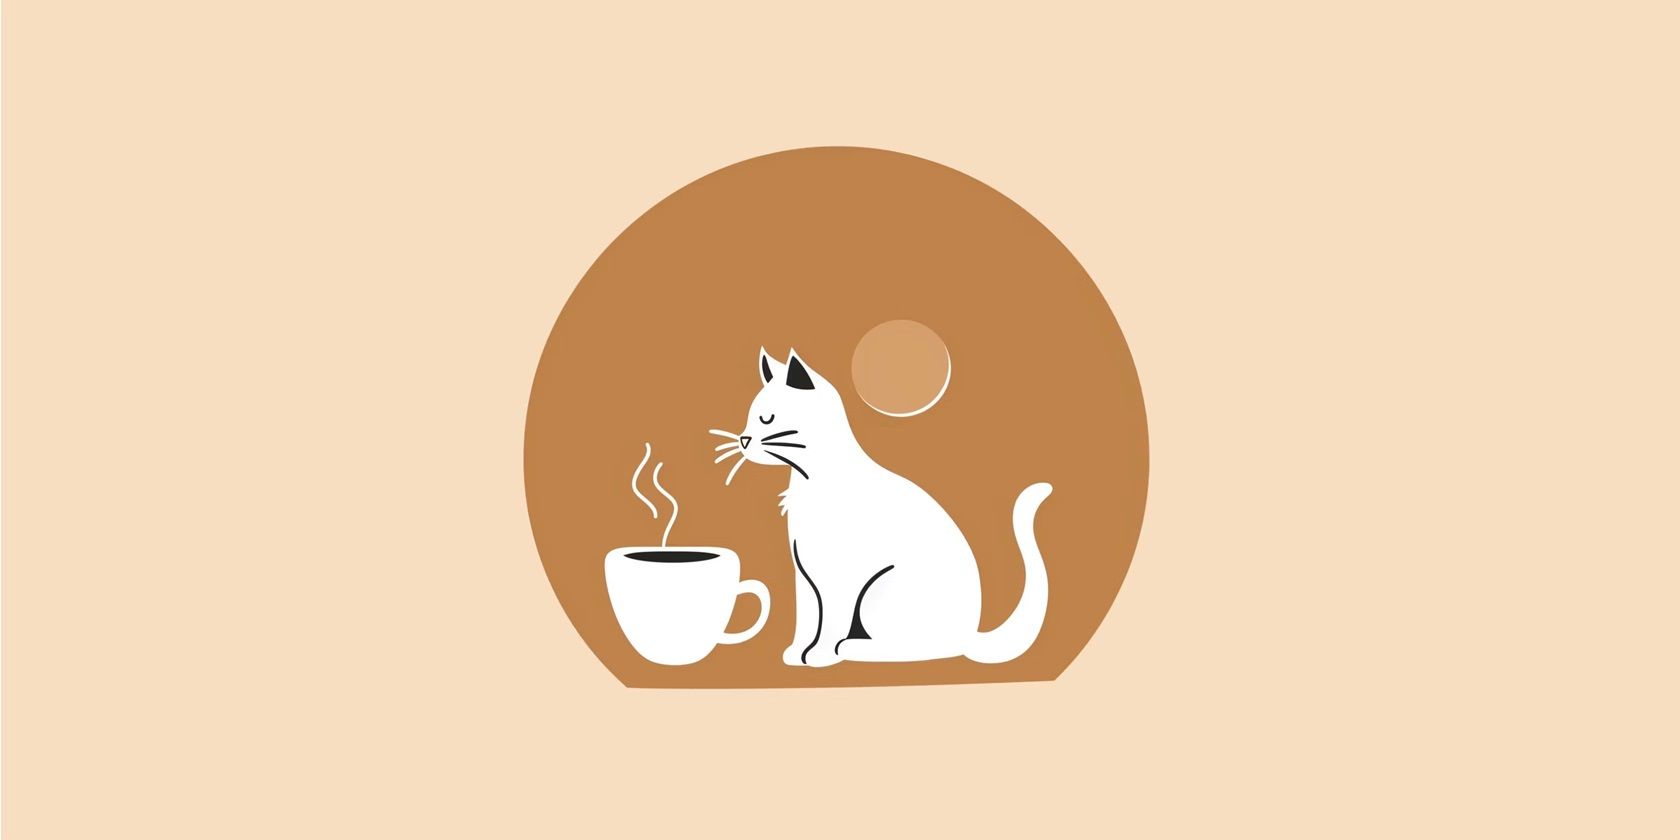 a-logo-of-a-cat-next-to-a-coffee-cup-2